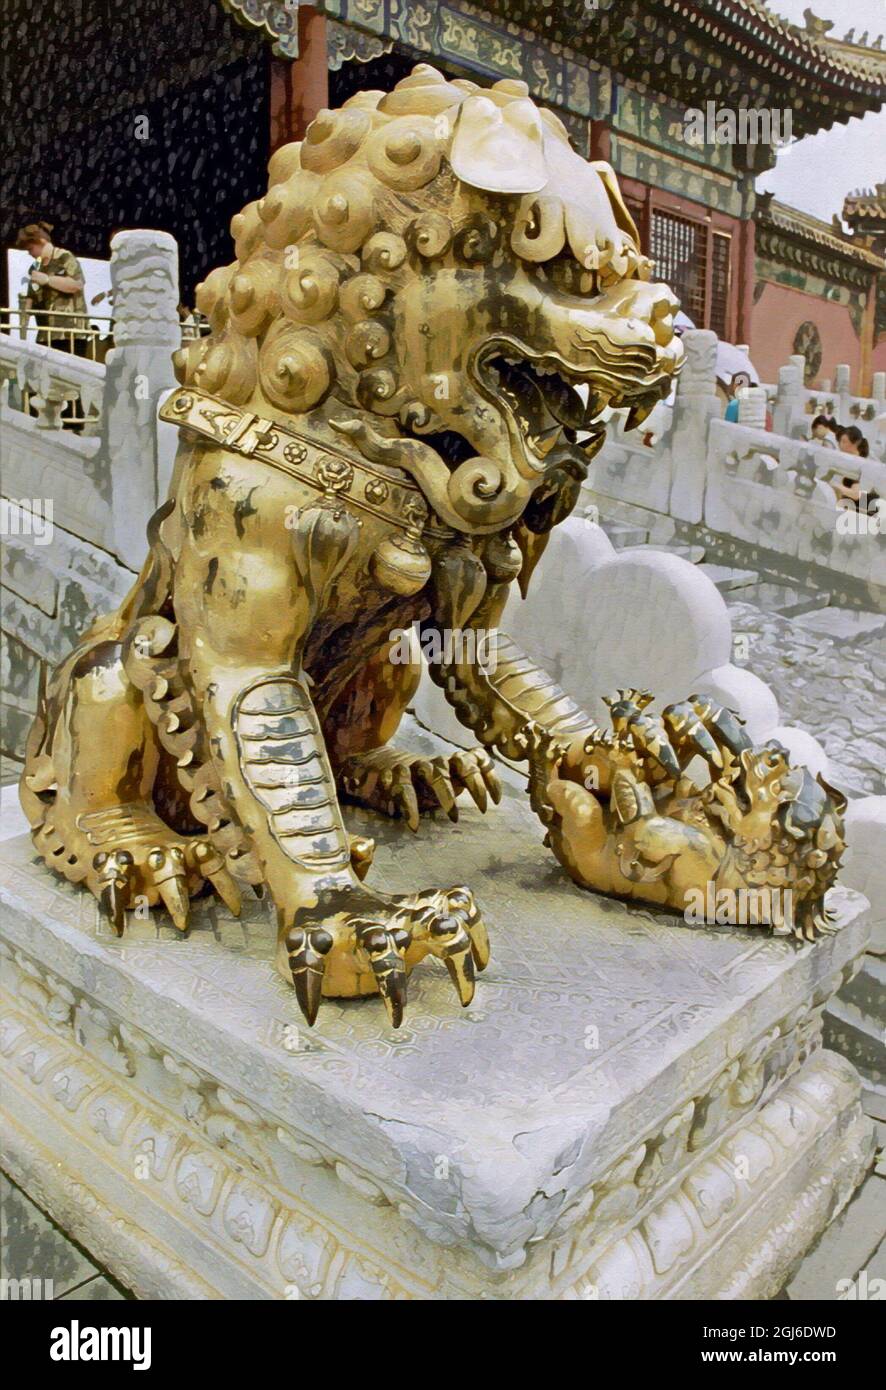 Golden lion at a gate in the The Forbidden City, GuGong, Beijing, China, UNESCO World Heritage Site, Gate of Heavenly Purity, QianQing palace Stock Photo